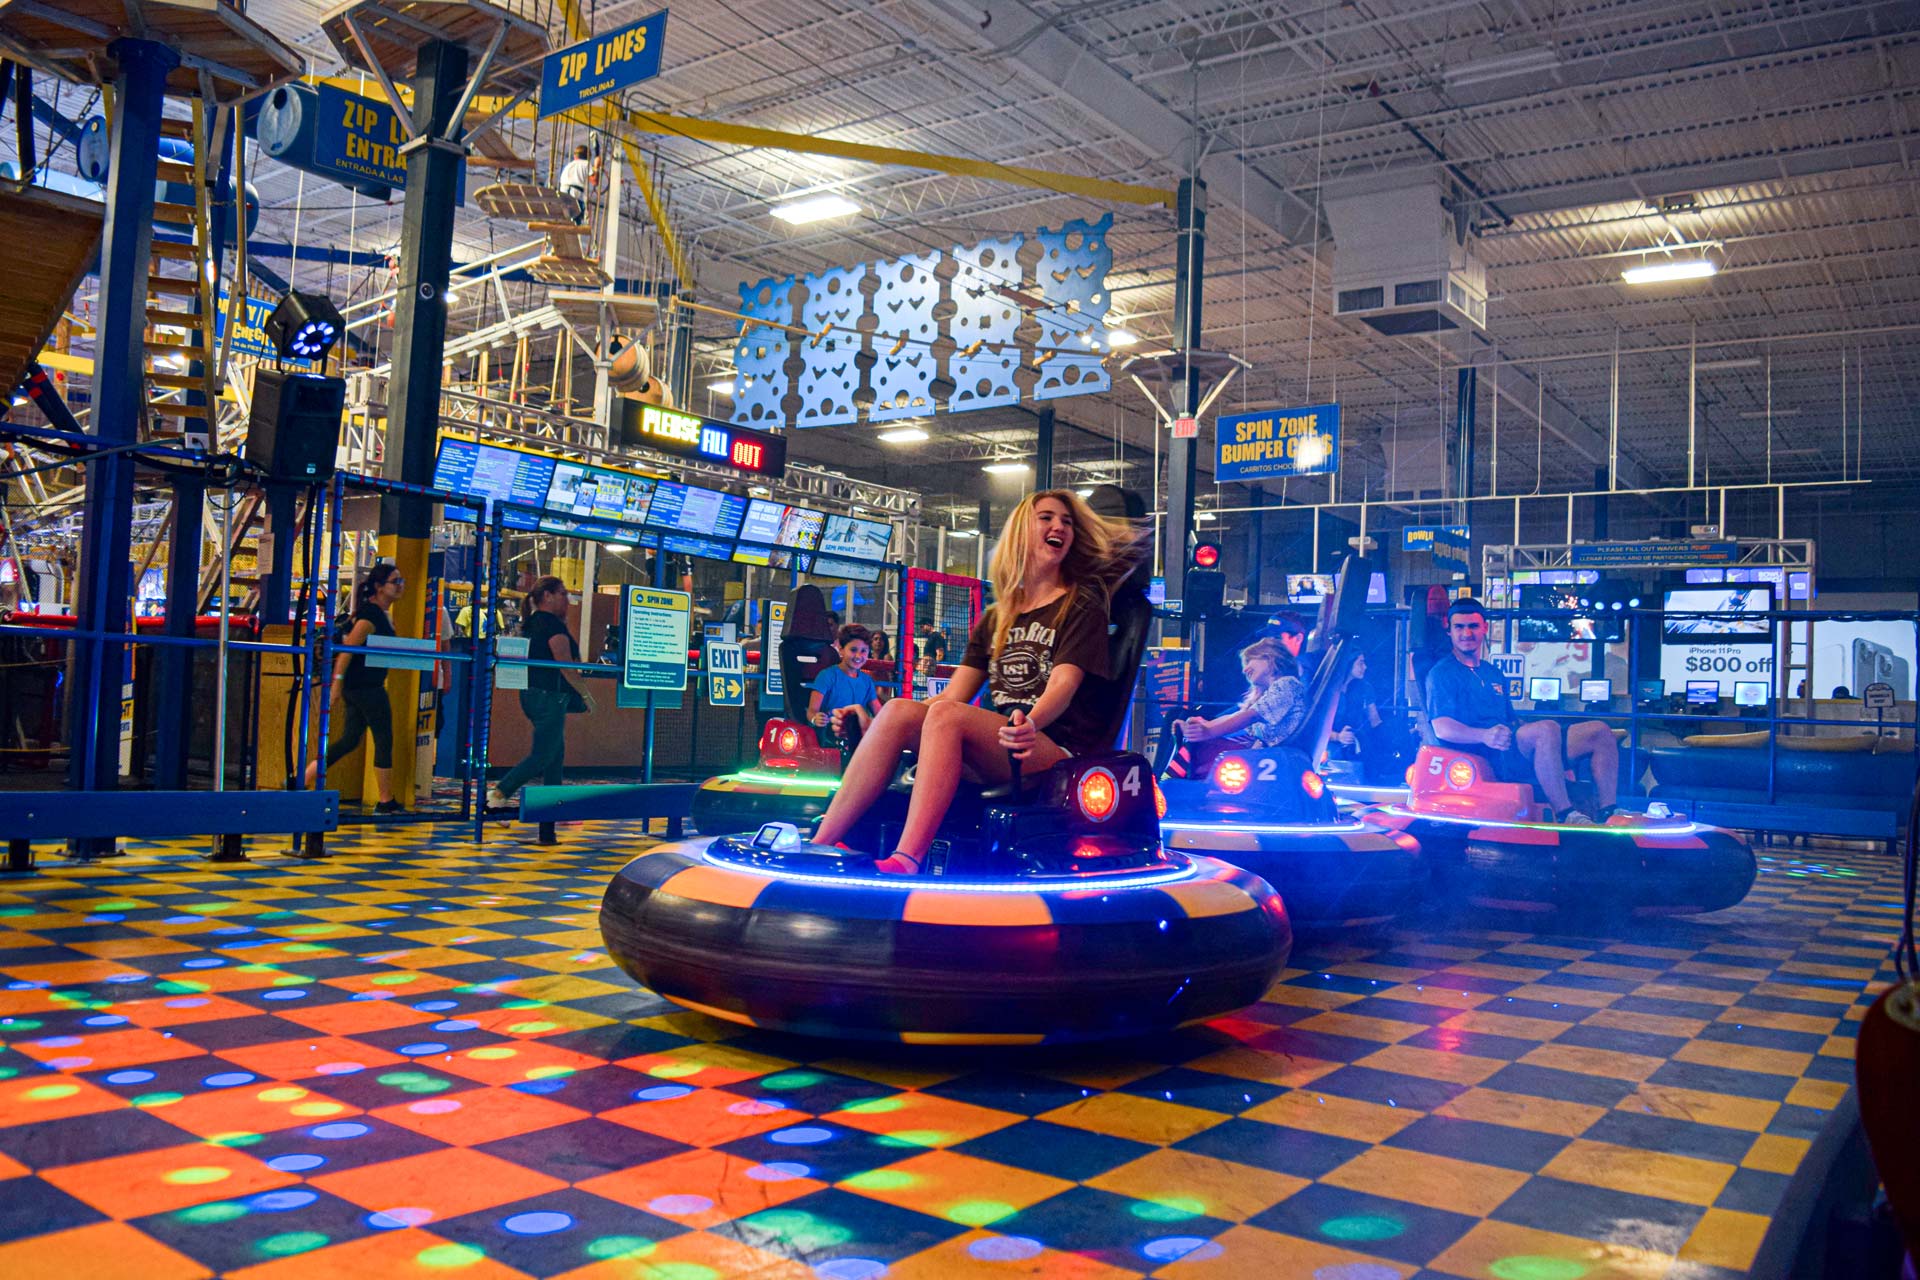 New Spin Zone Bumper Cars, Planet Air Sports